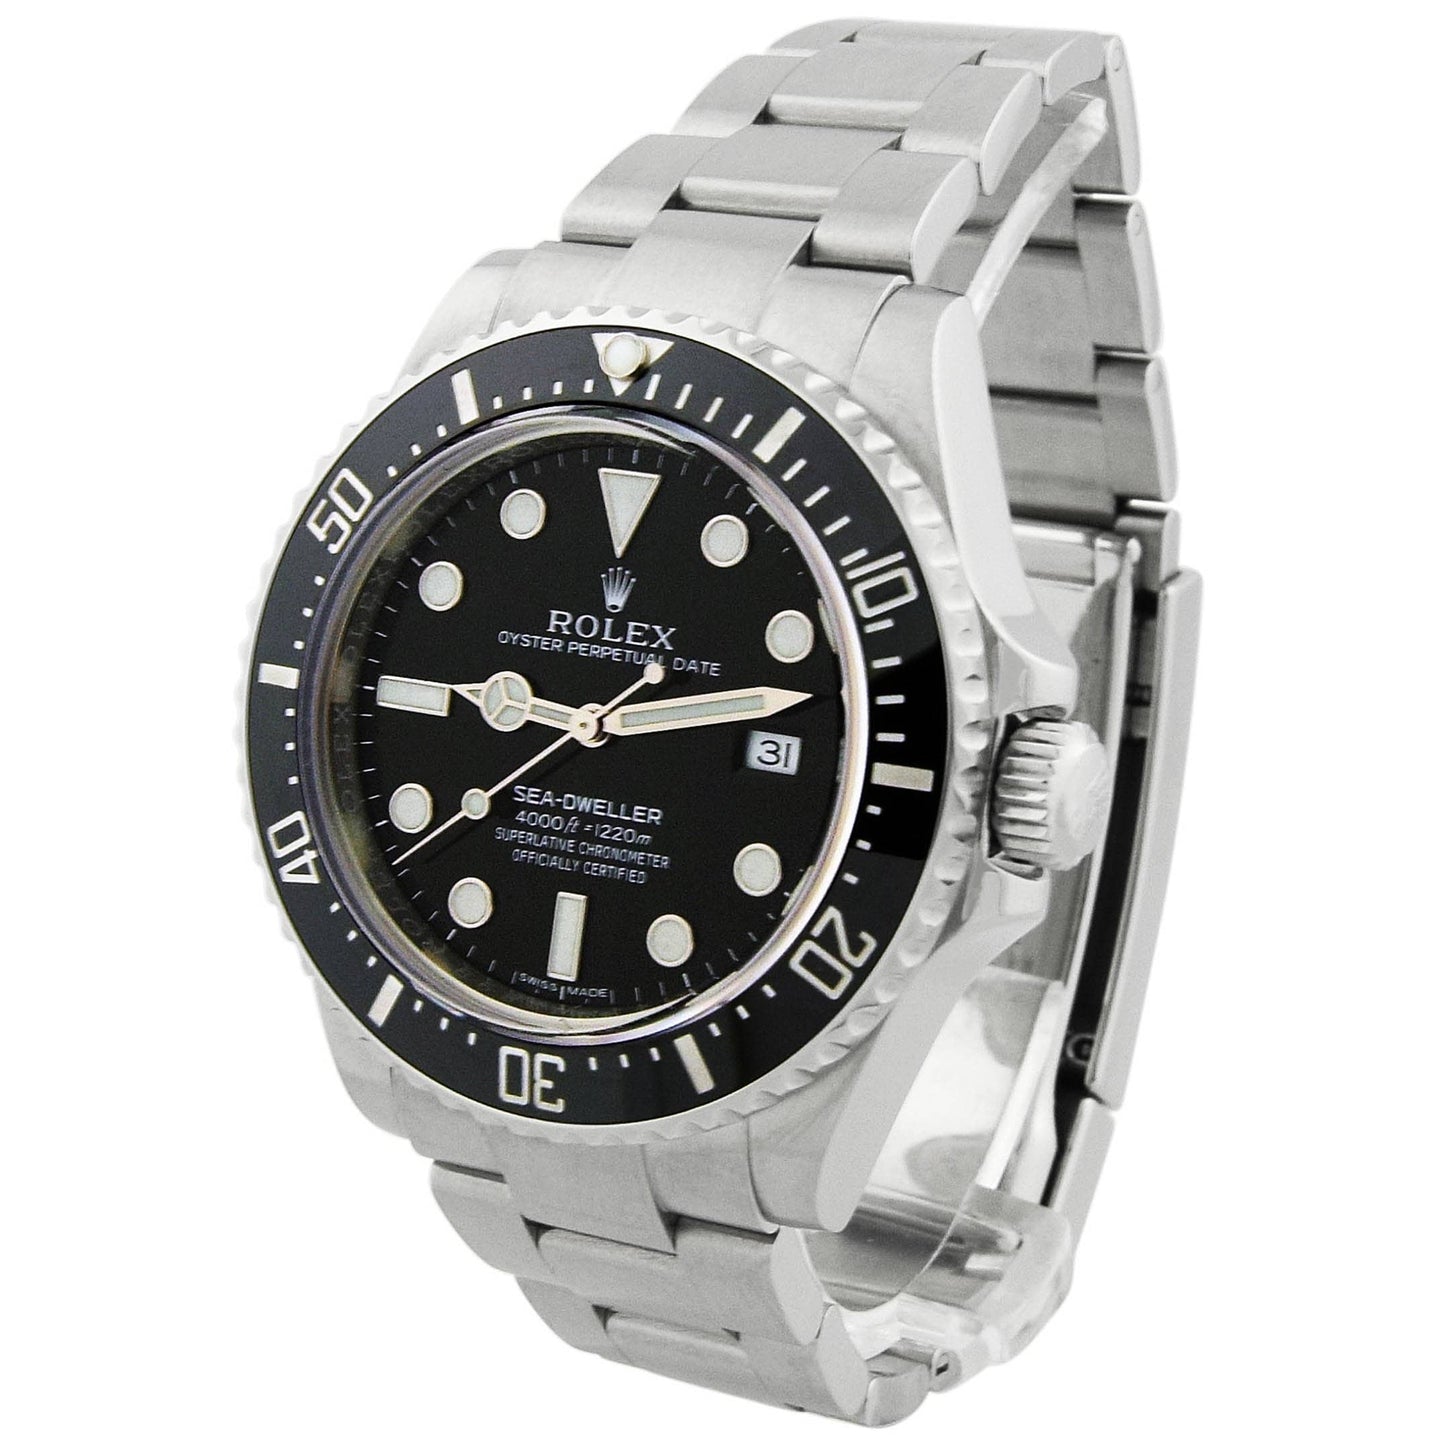 Rolex Sea-Dweller 4000 Stainless Steel 40mm Black Dot Dial Watch Reference# 116600